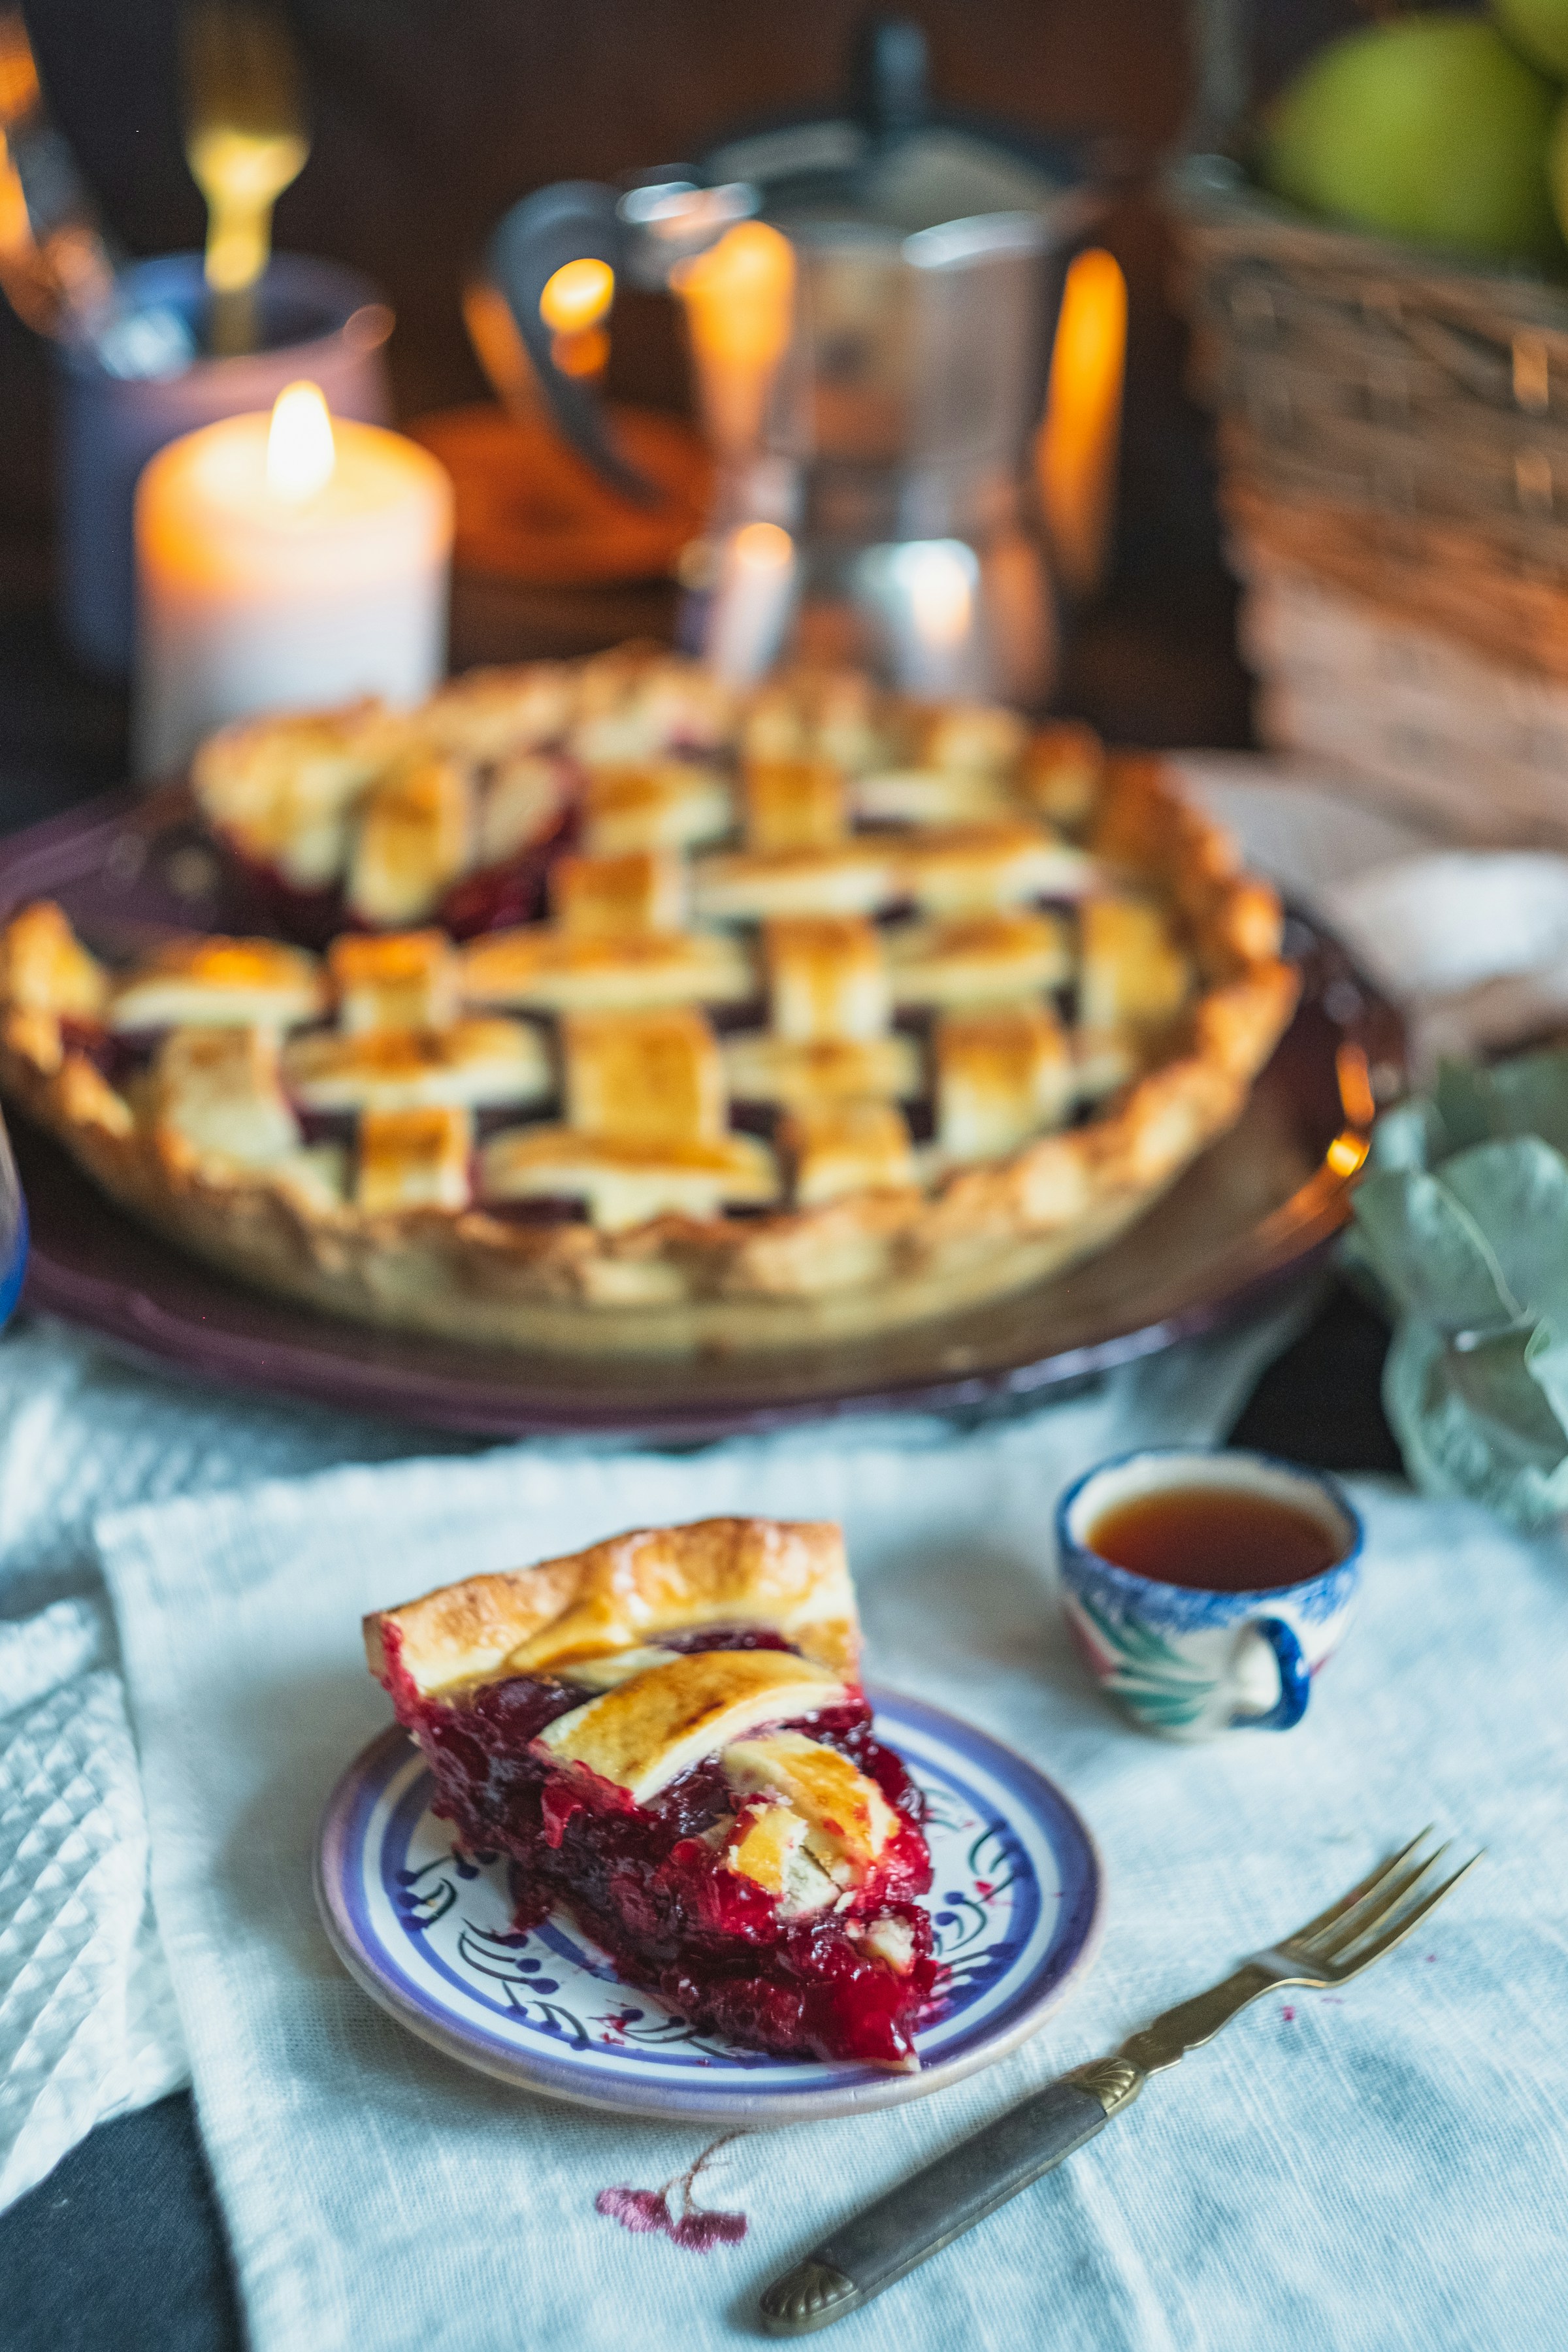 A slice of pie and a cup of tea | Source: Unsplash